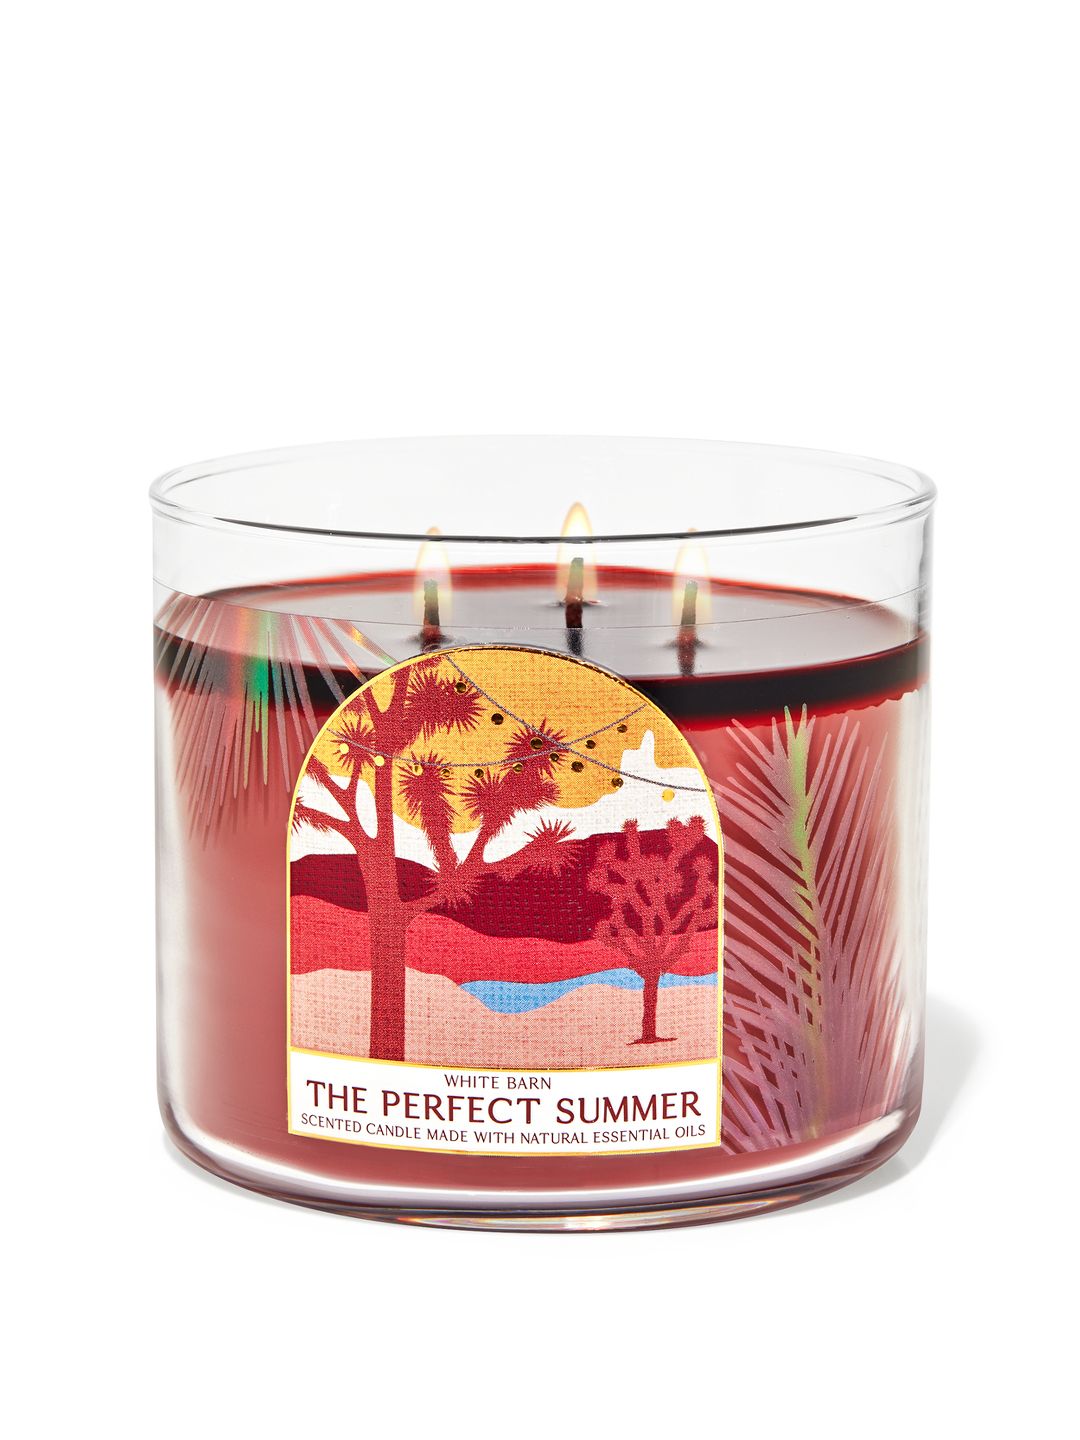 Bath & Body Works White Barn The Perfect Summer 3-Wick Scented Candle - 411 g Price in India